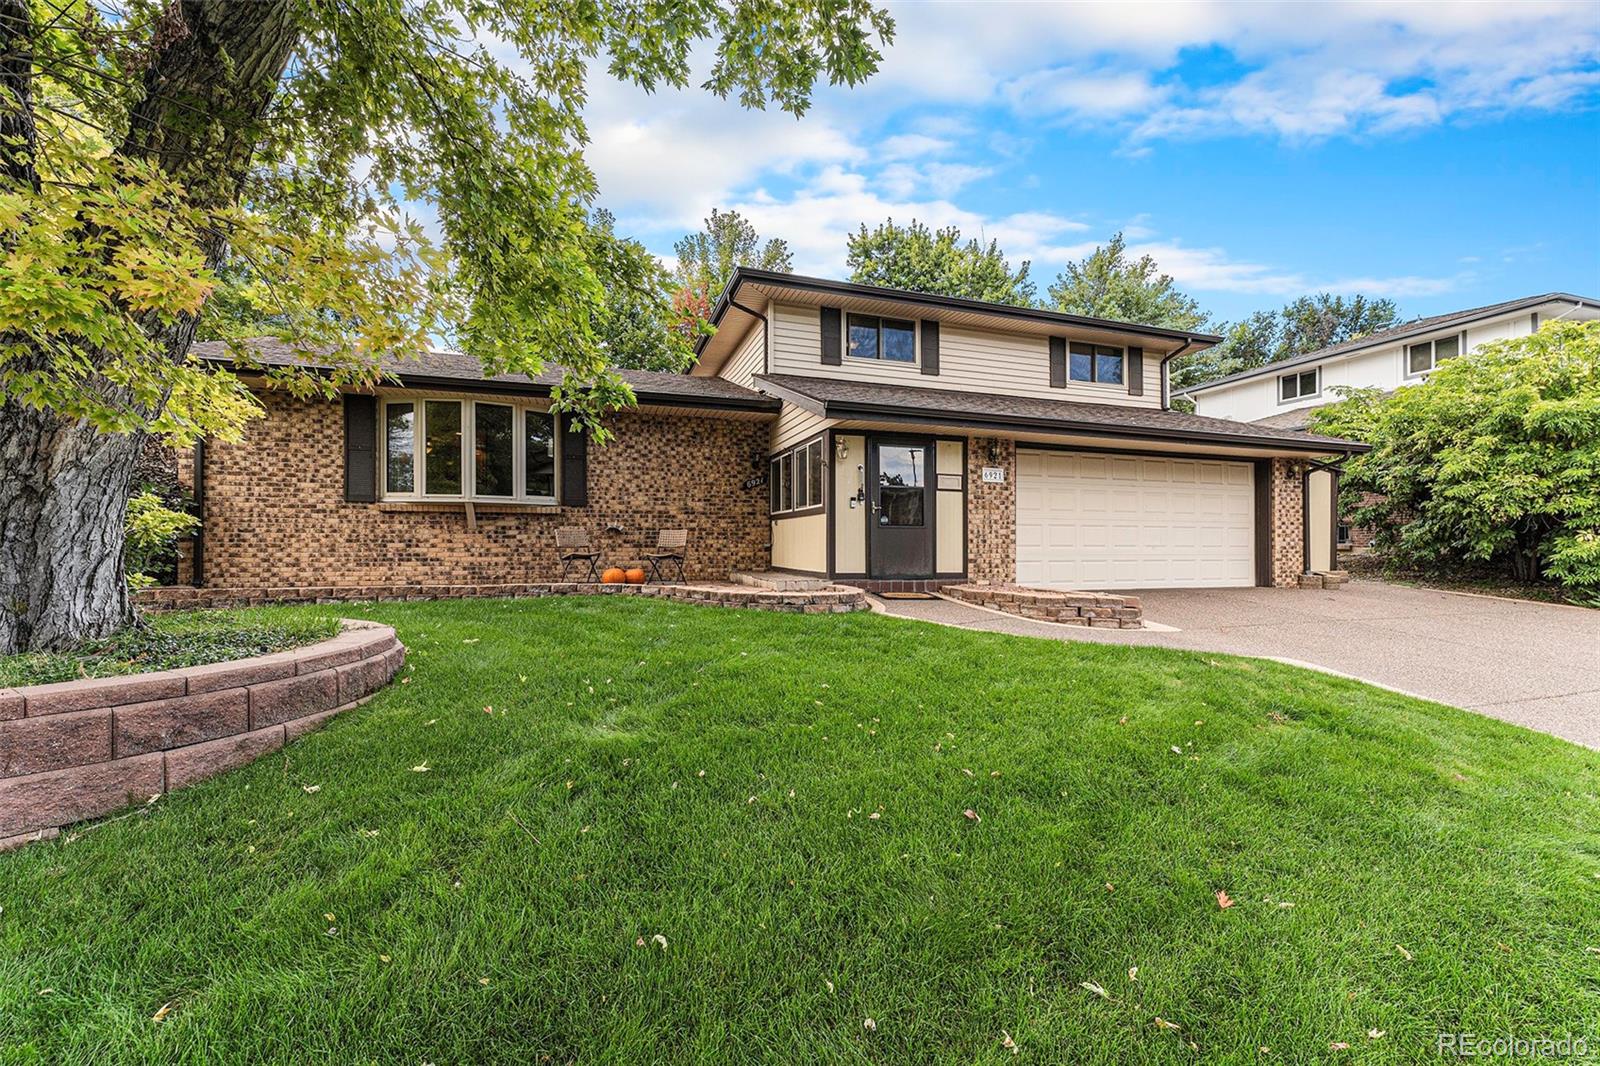 6921  ammons street, arvada sold home. Closed on 2024-02-02 for $653,035.